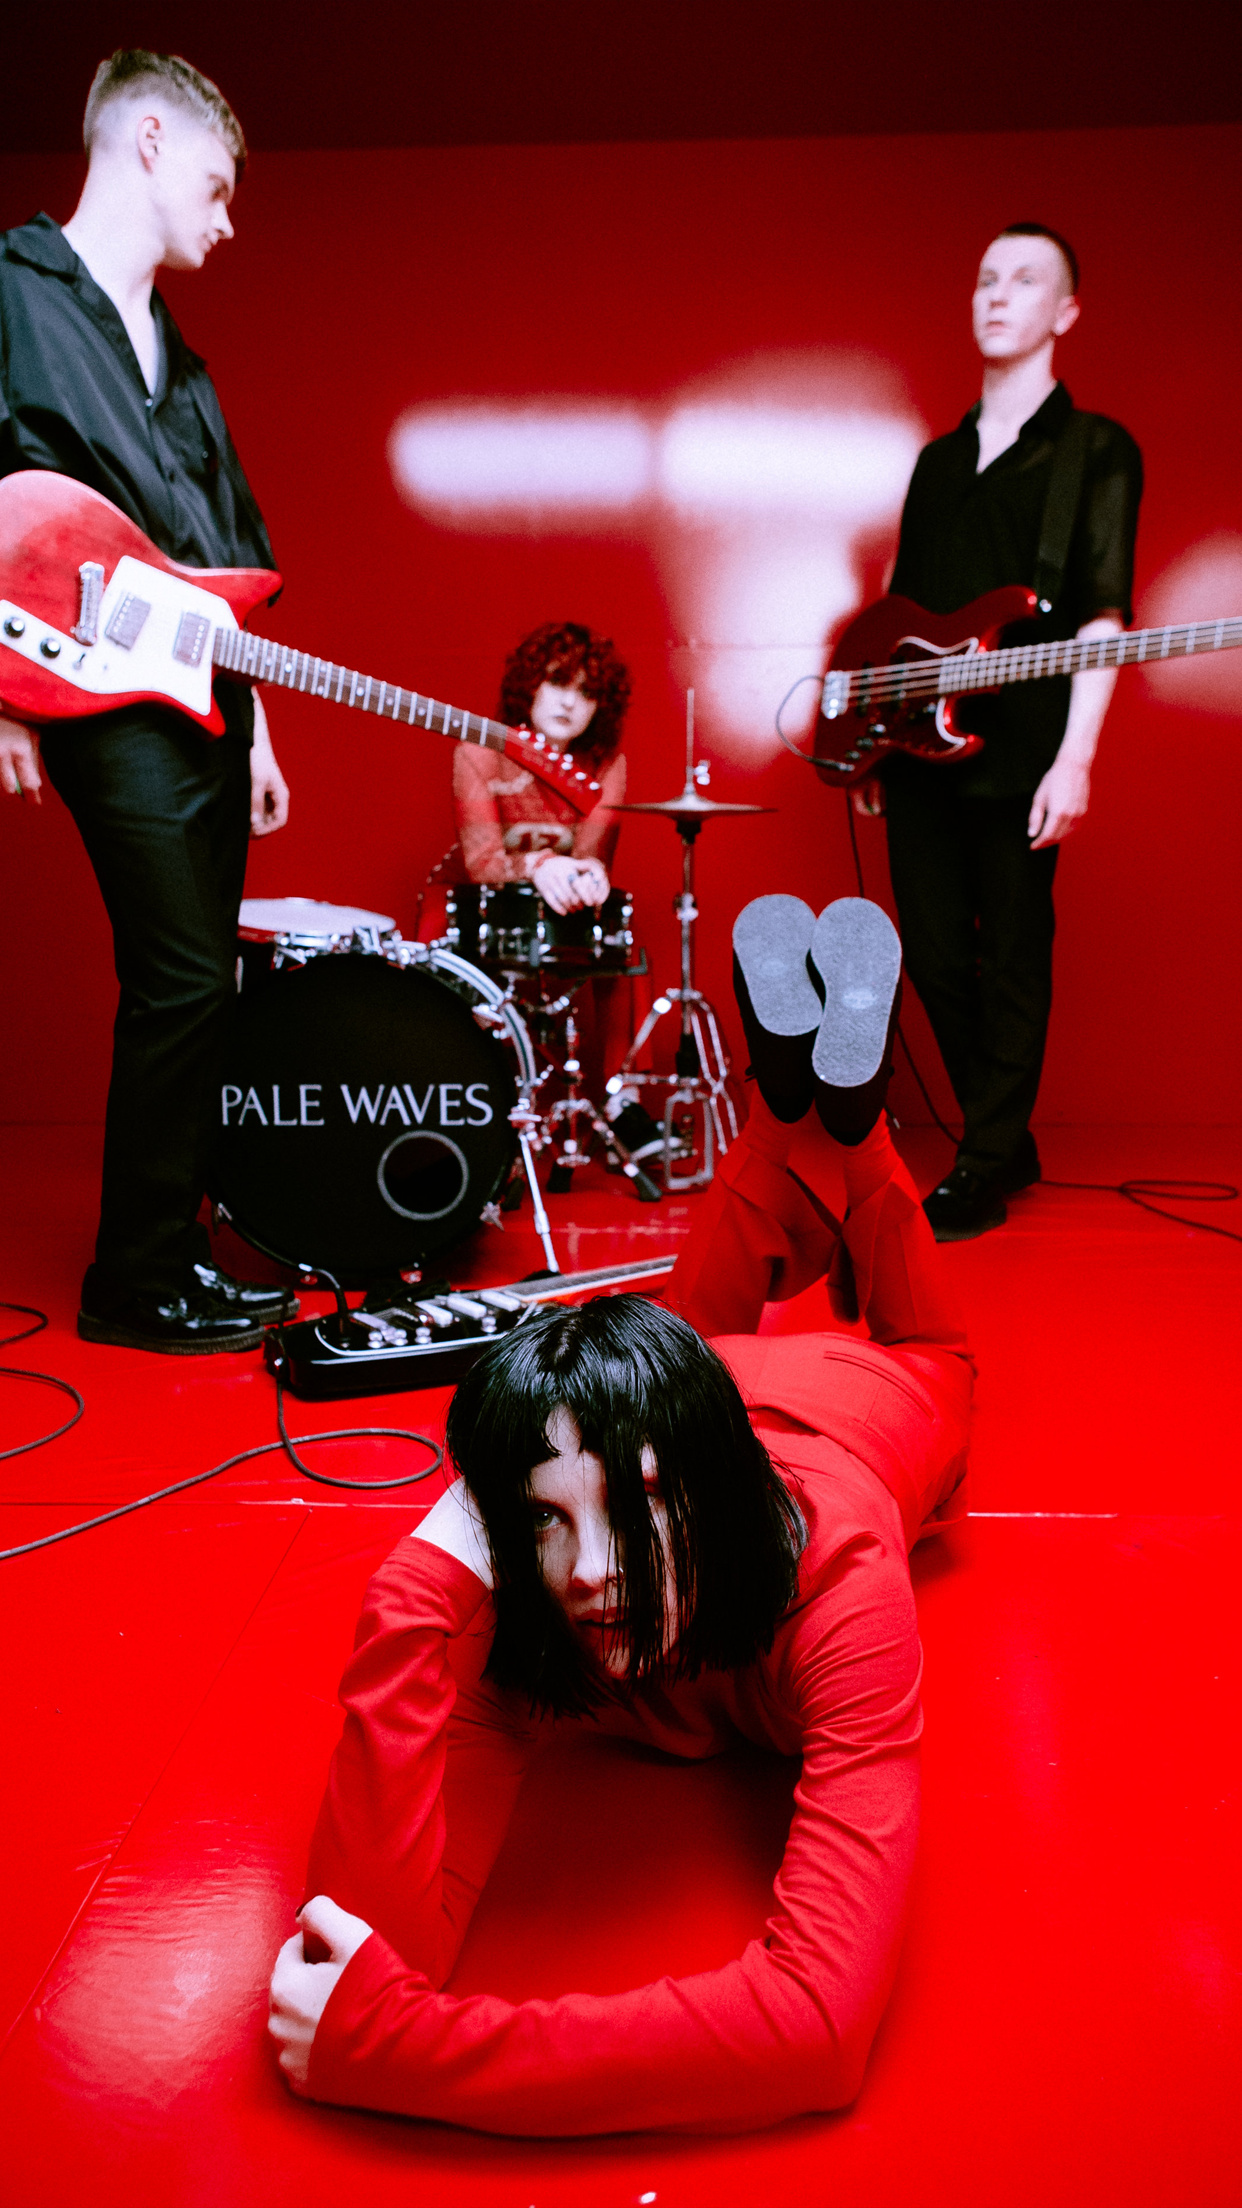 Pale Waves, Cool phone wallpaper, Fan request, Personalized style, 1250x2210 HD Handy